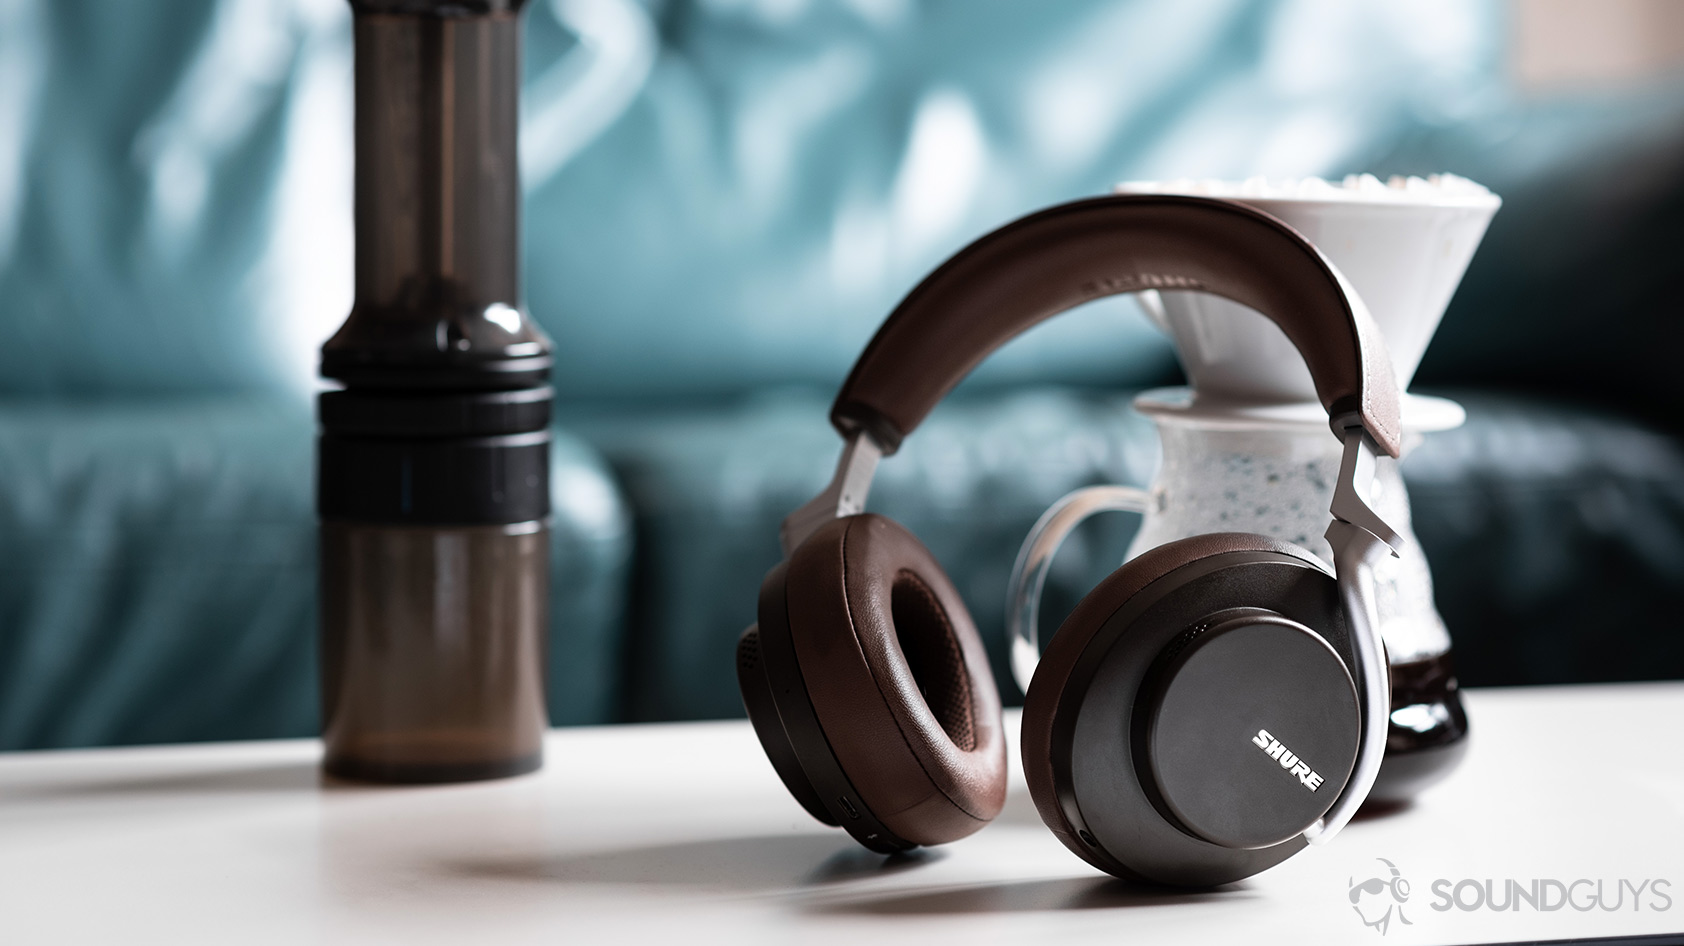 An picture of the Shure Aonic 50 noise canceling headphones in brown leaning against a coffee carafe, used to demonstrate the differences of the Sony WH-1000XM4 vs Shure AONIC 50.